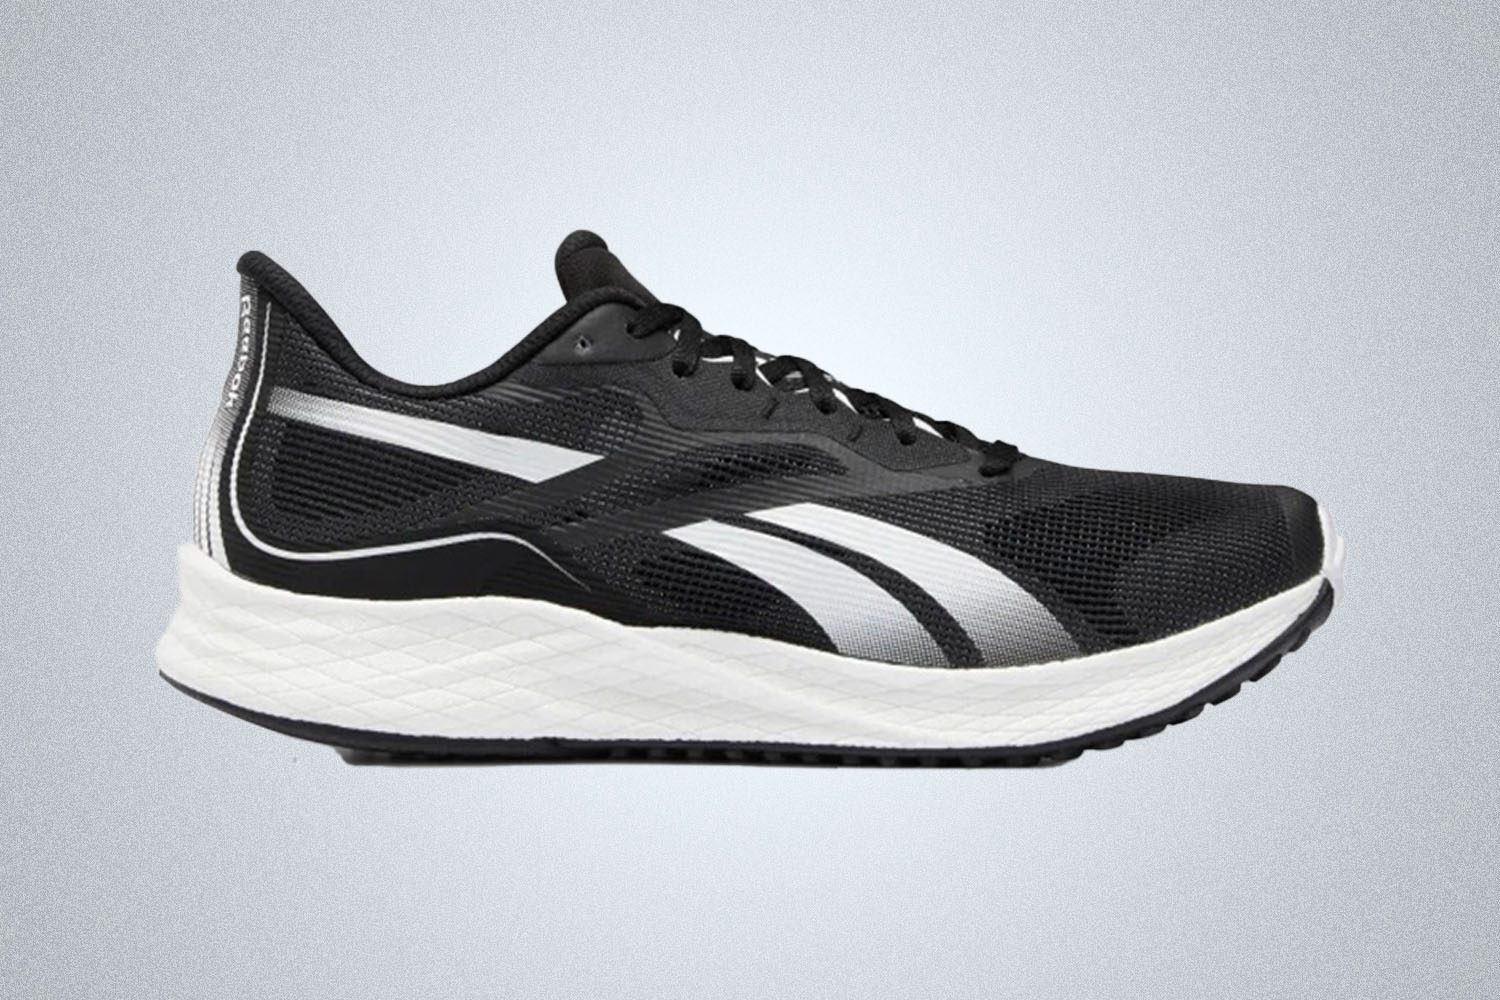 A pair of black and white accented Reebok running shoes on a grey background